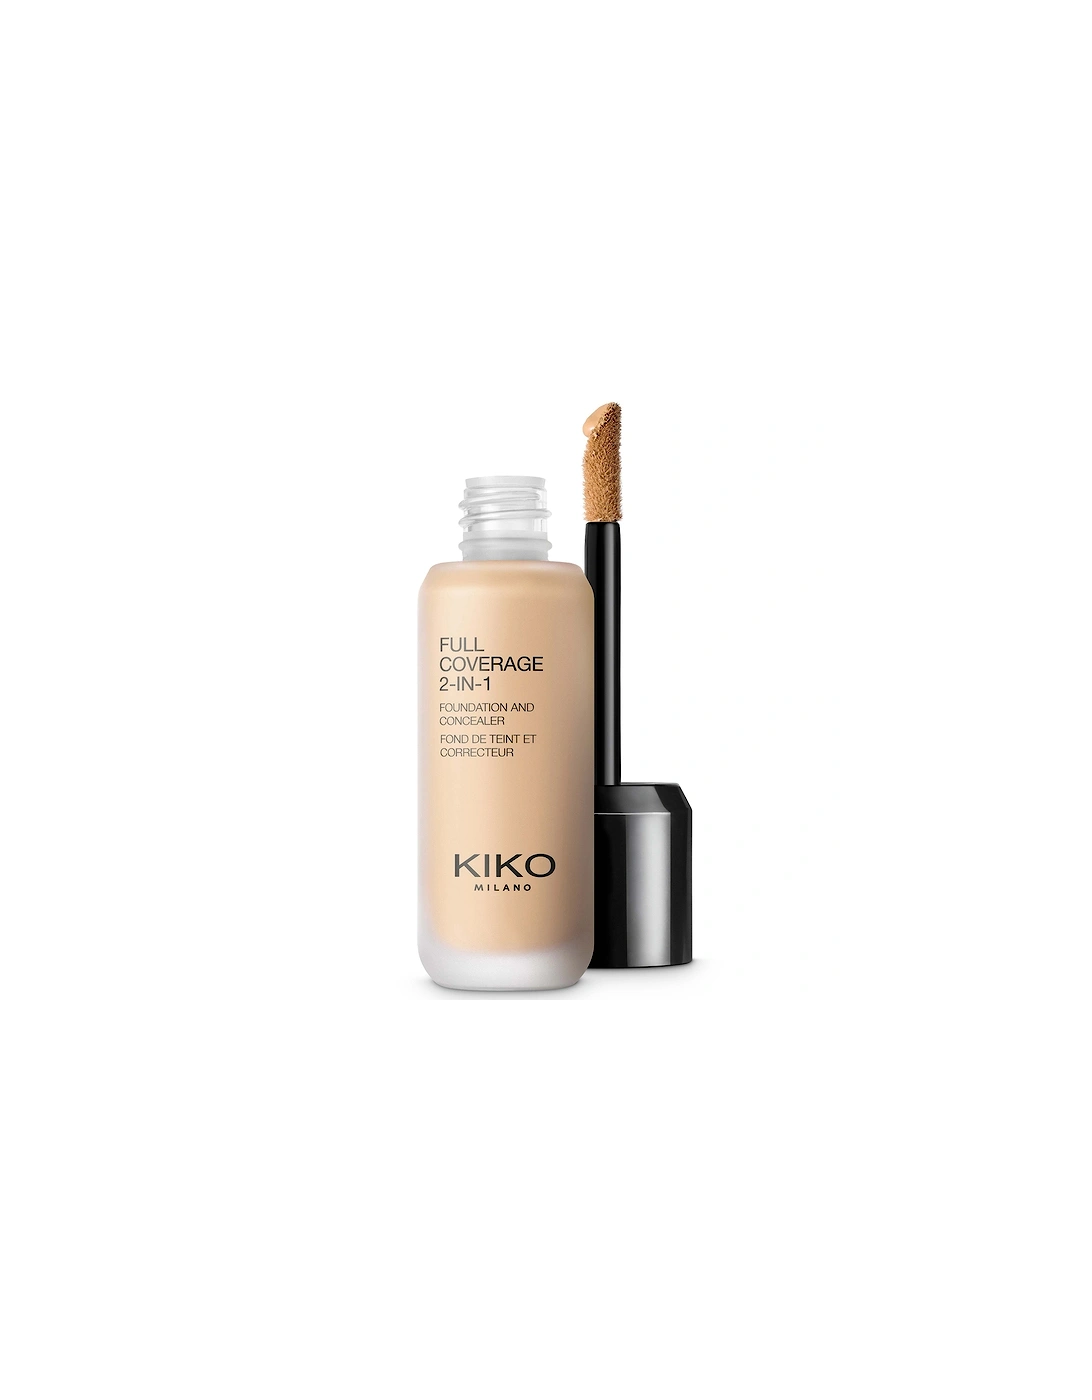 Full Coverage 2-in-1 Foundation and Concealer 25ml - 25 Warm Beige, 2 of 1